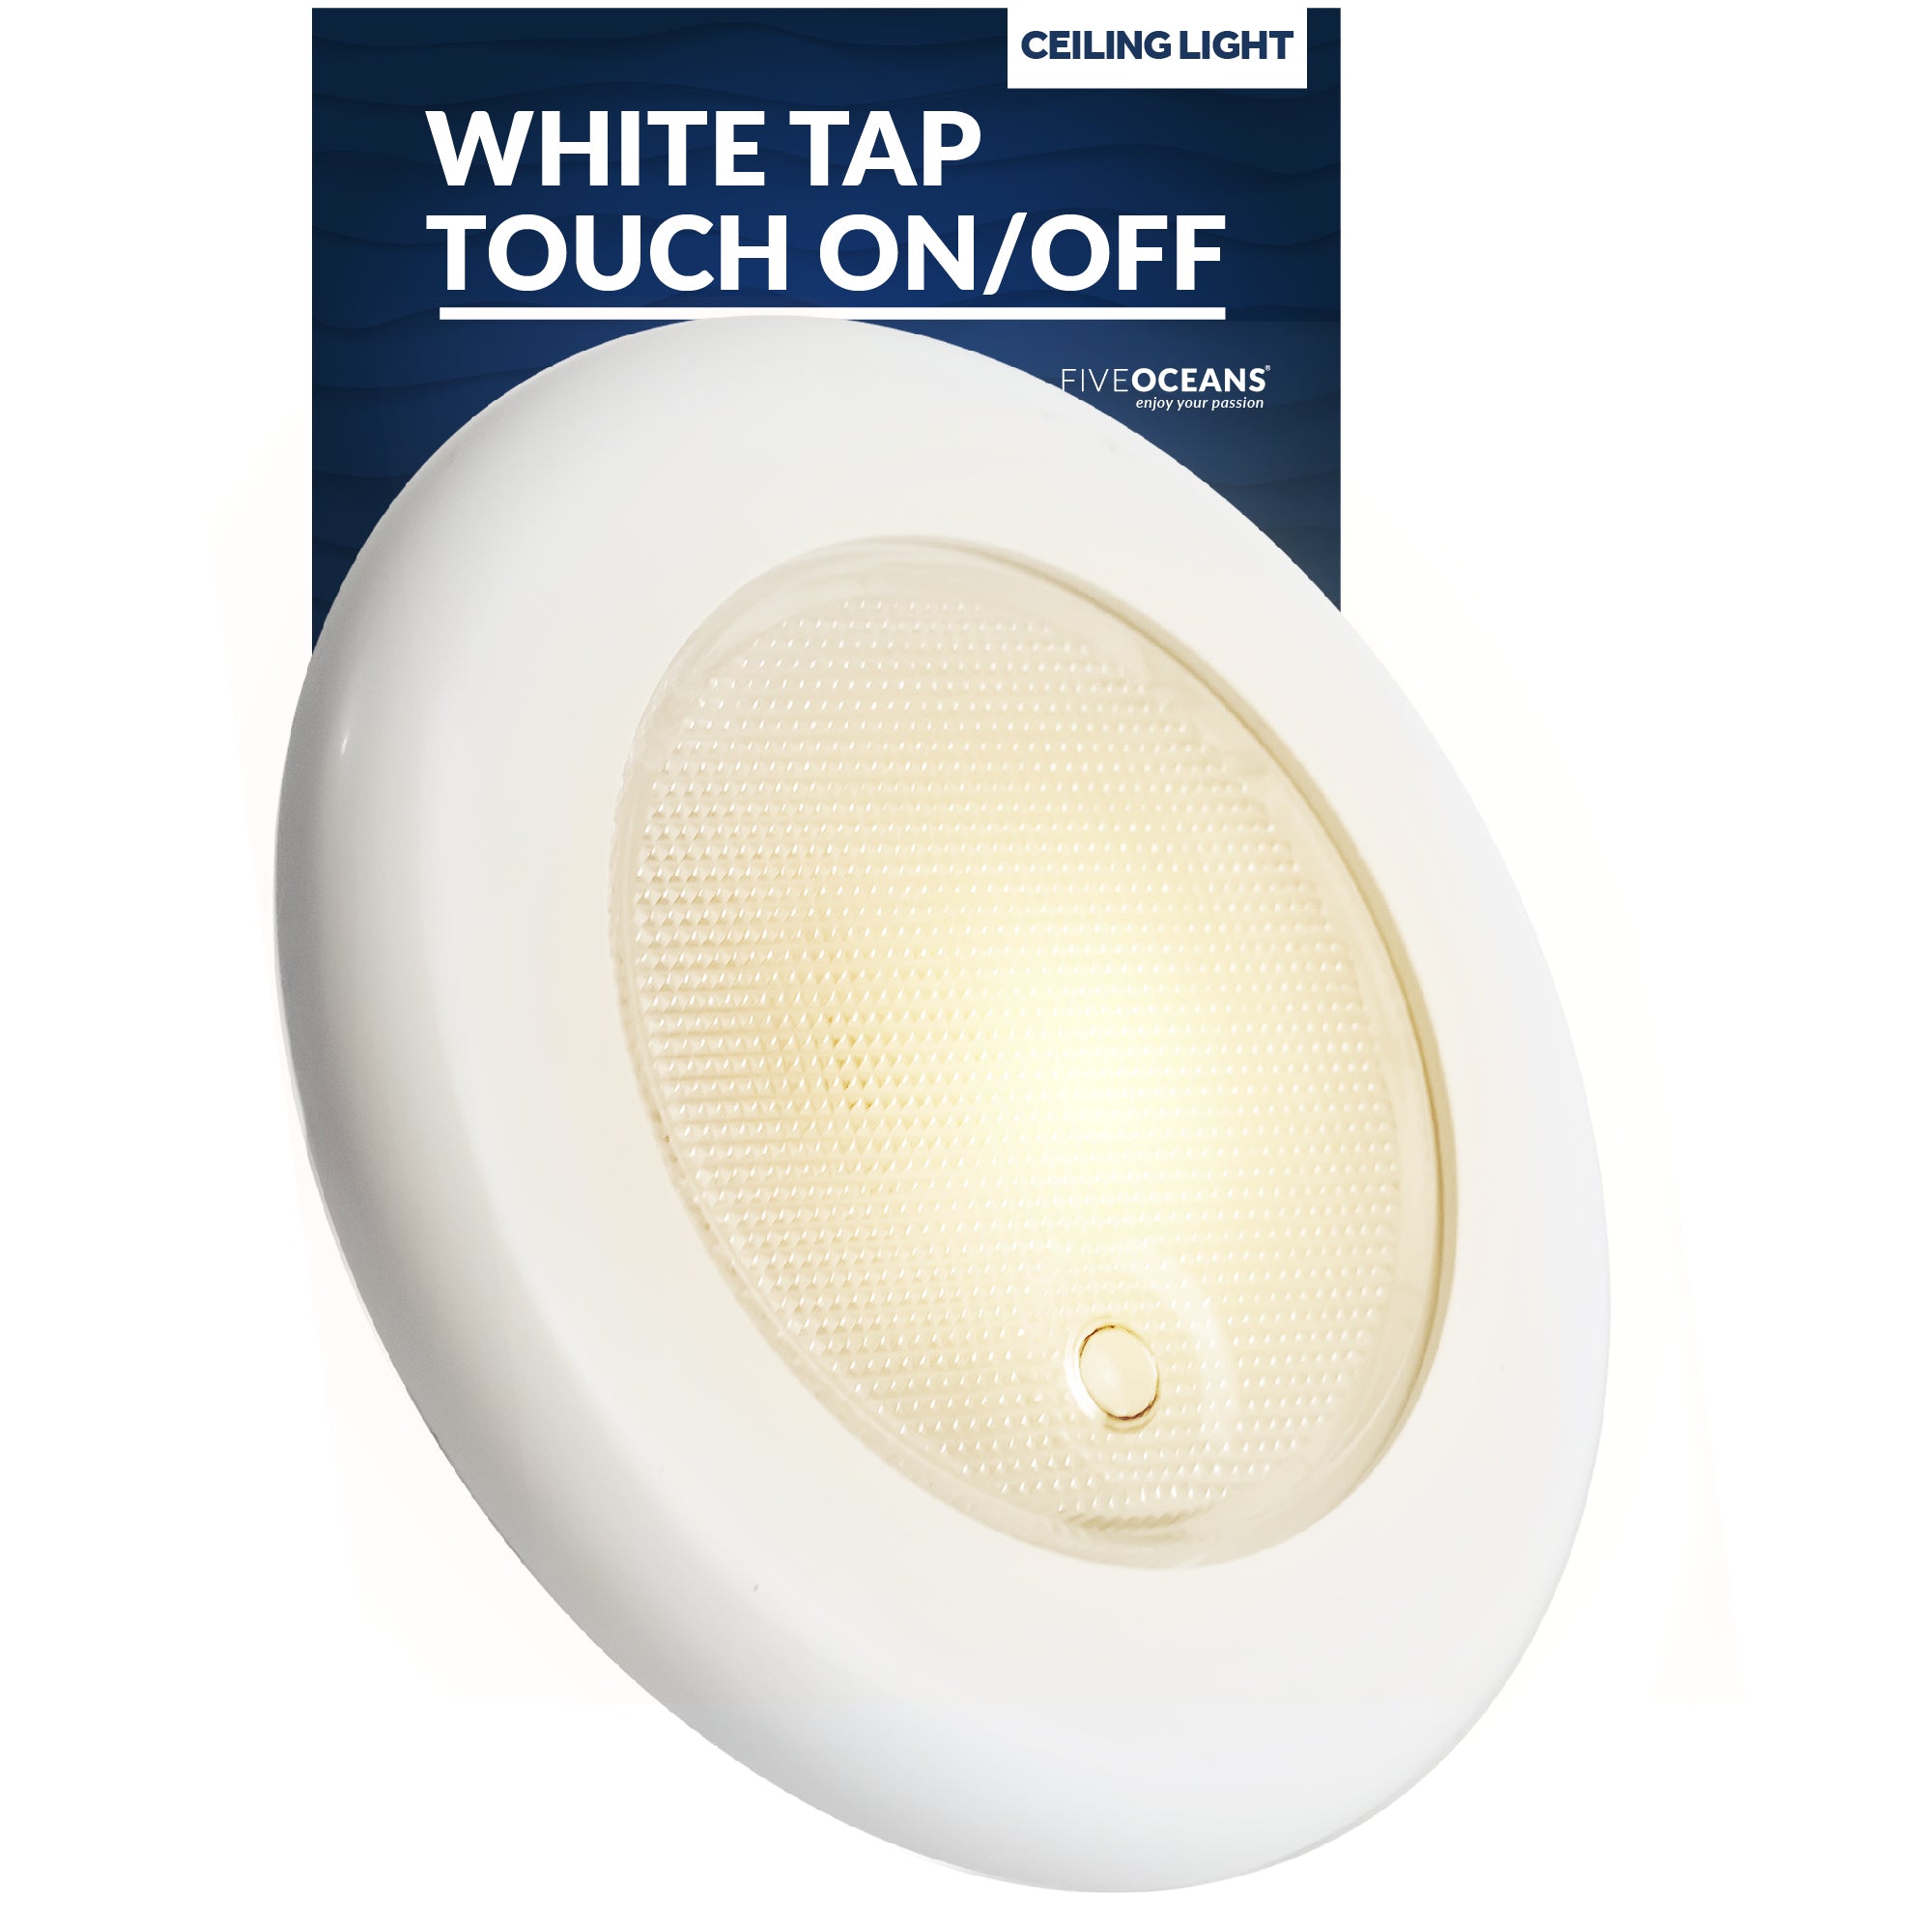 White Tap Touch On/Off Ceiling Light - FO2198